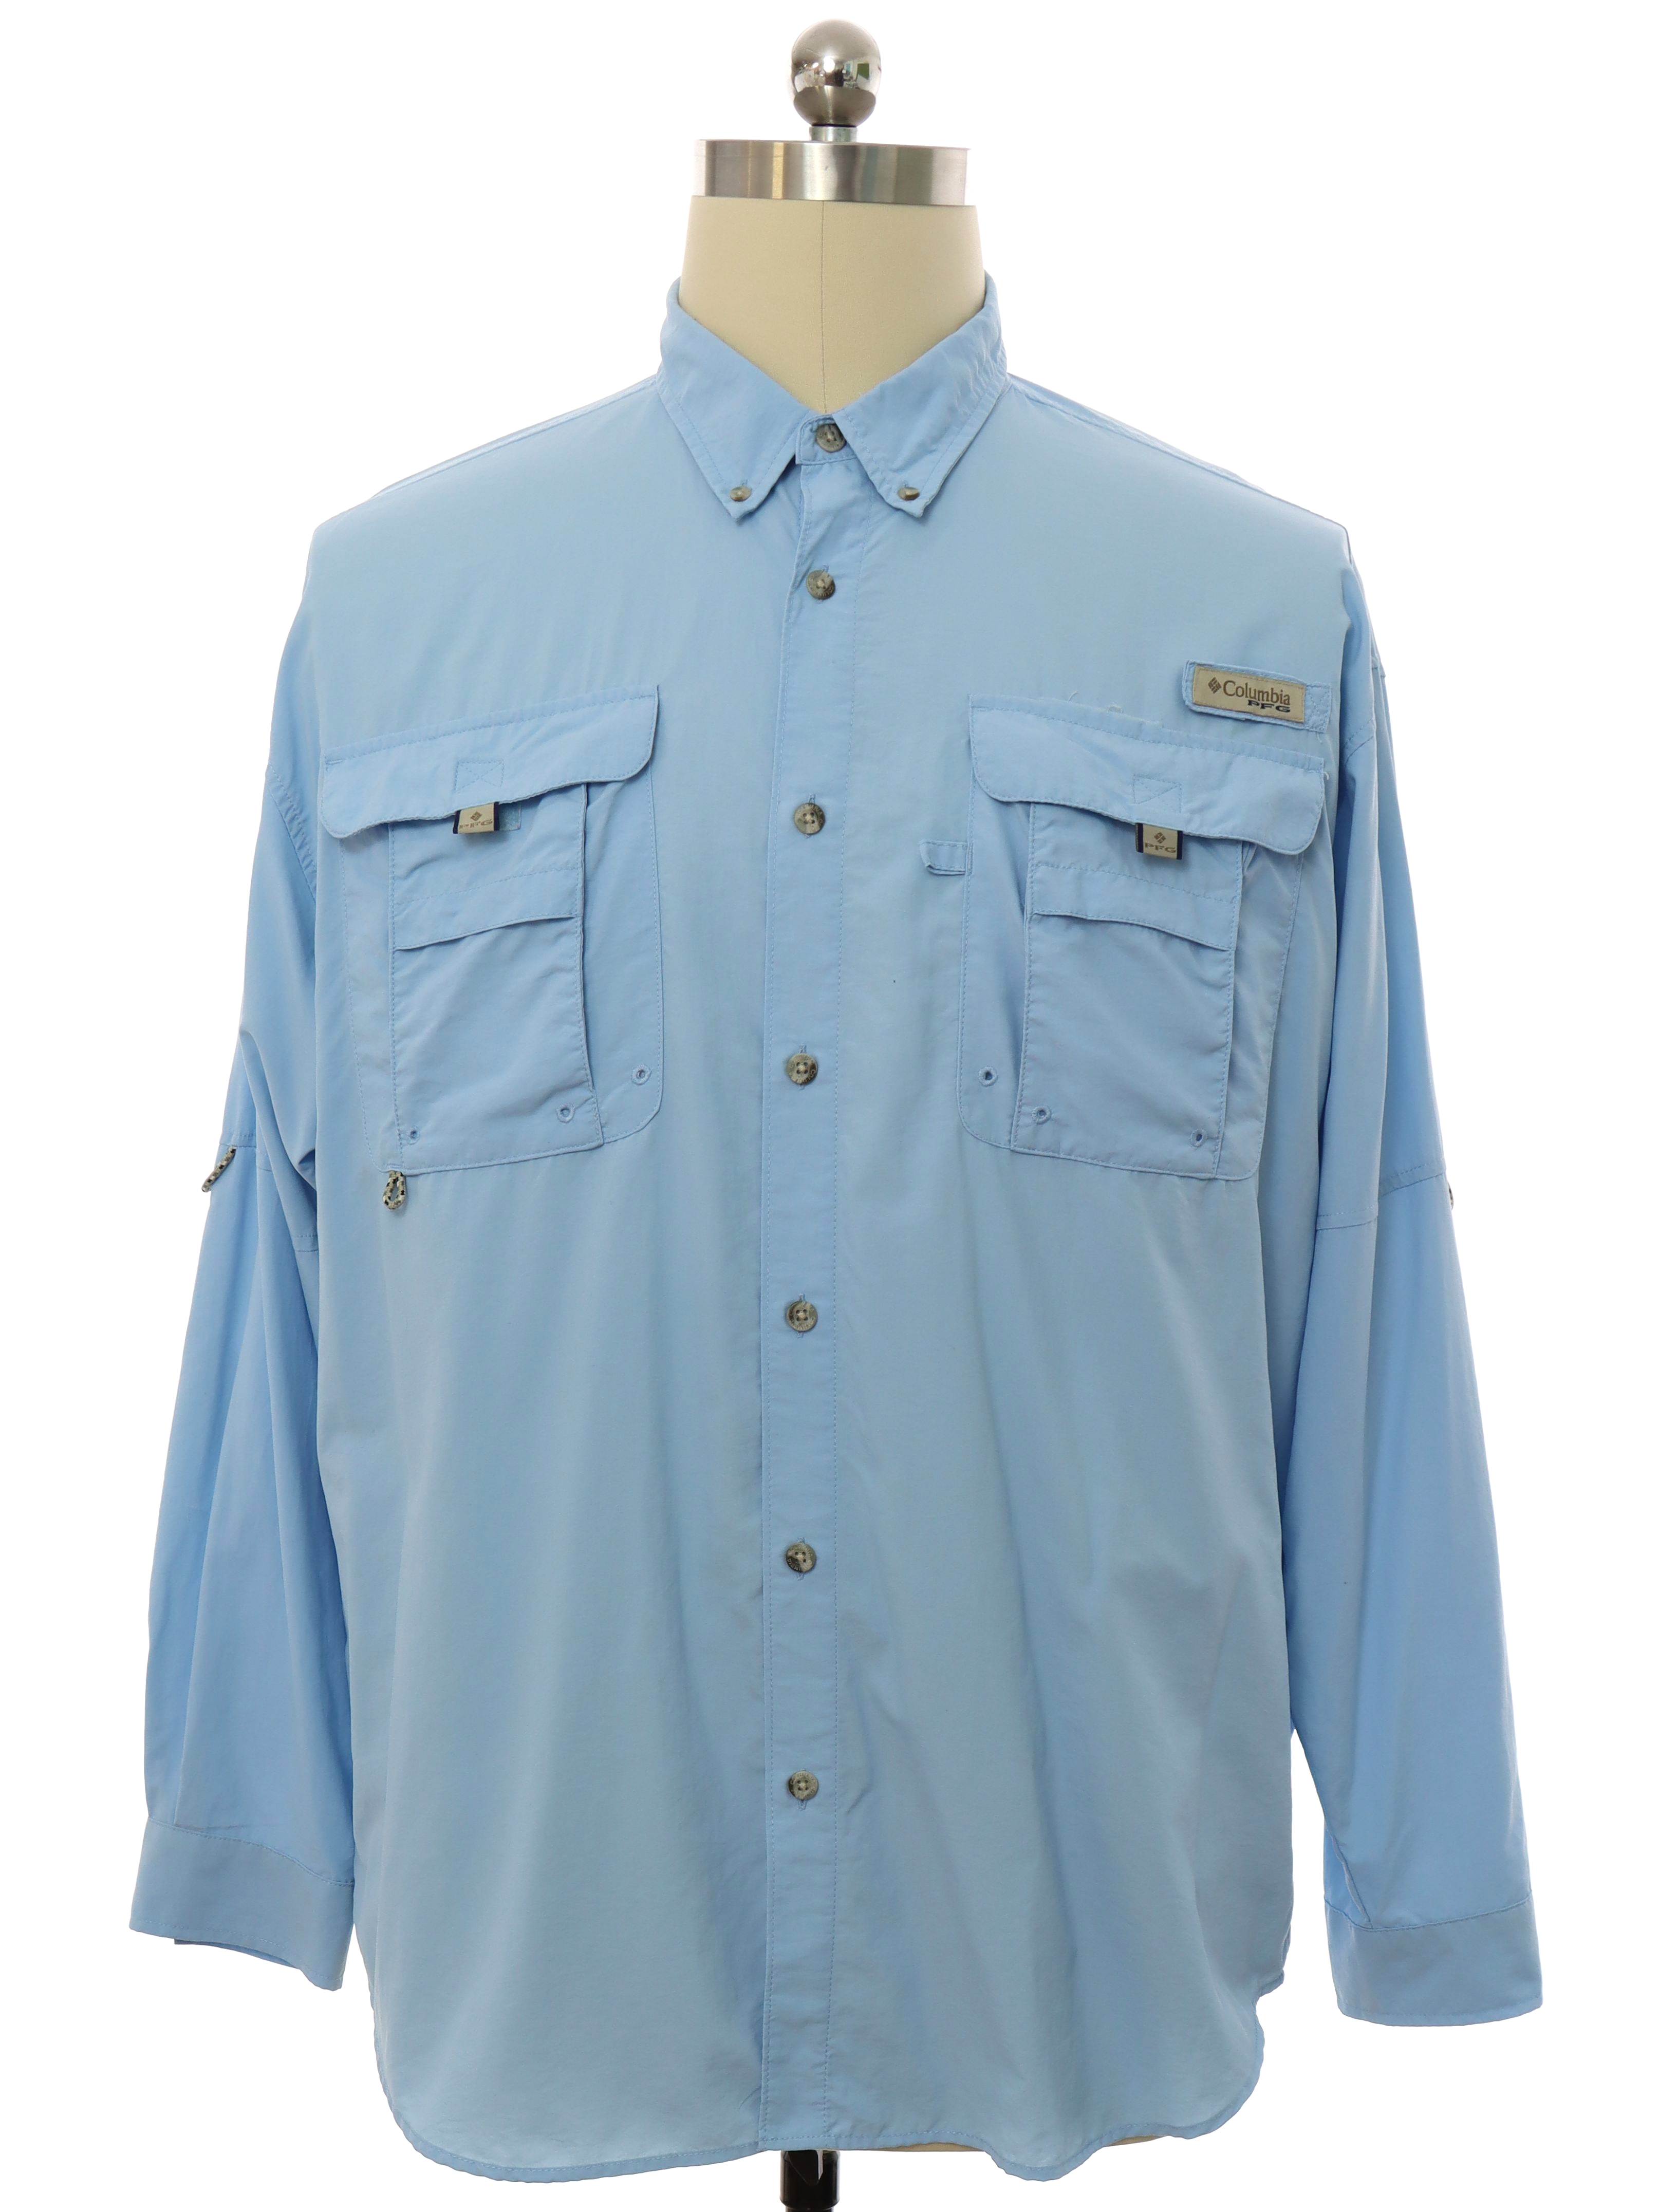 Vintage 1990's Shirt: 90s -Columbia Sportswear- Mens tall fit baby blue  polyester nylon blend button cuff longsleeve button up front shirt.  Outdoorsman style sport shirt with PFG logos above the left chest